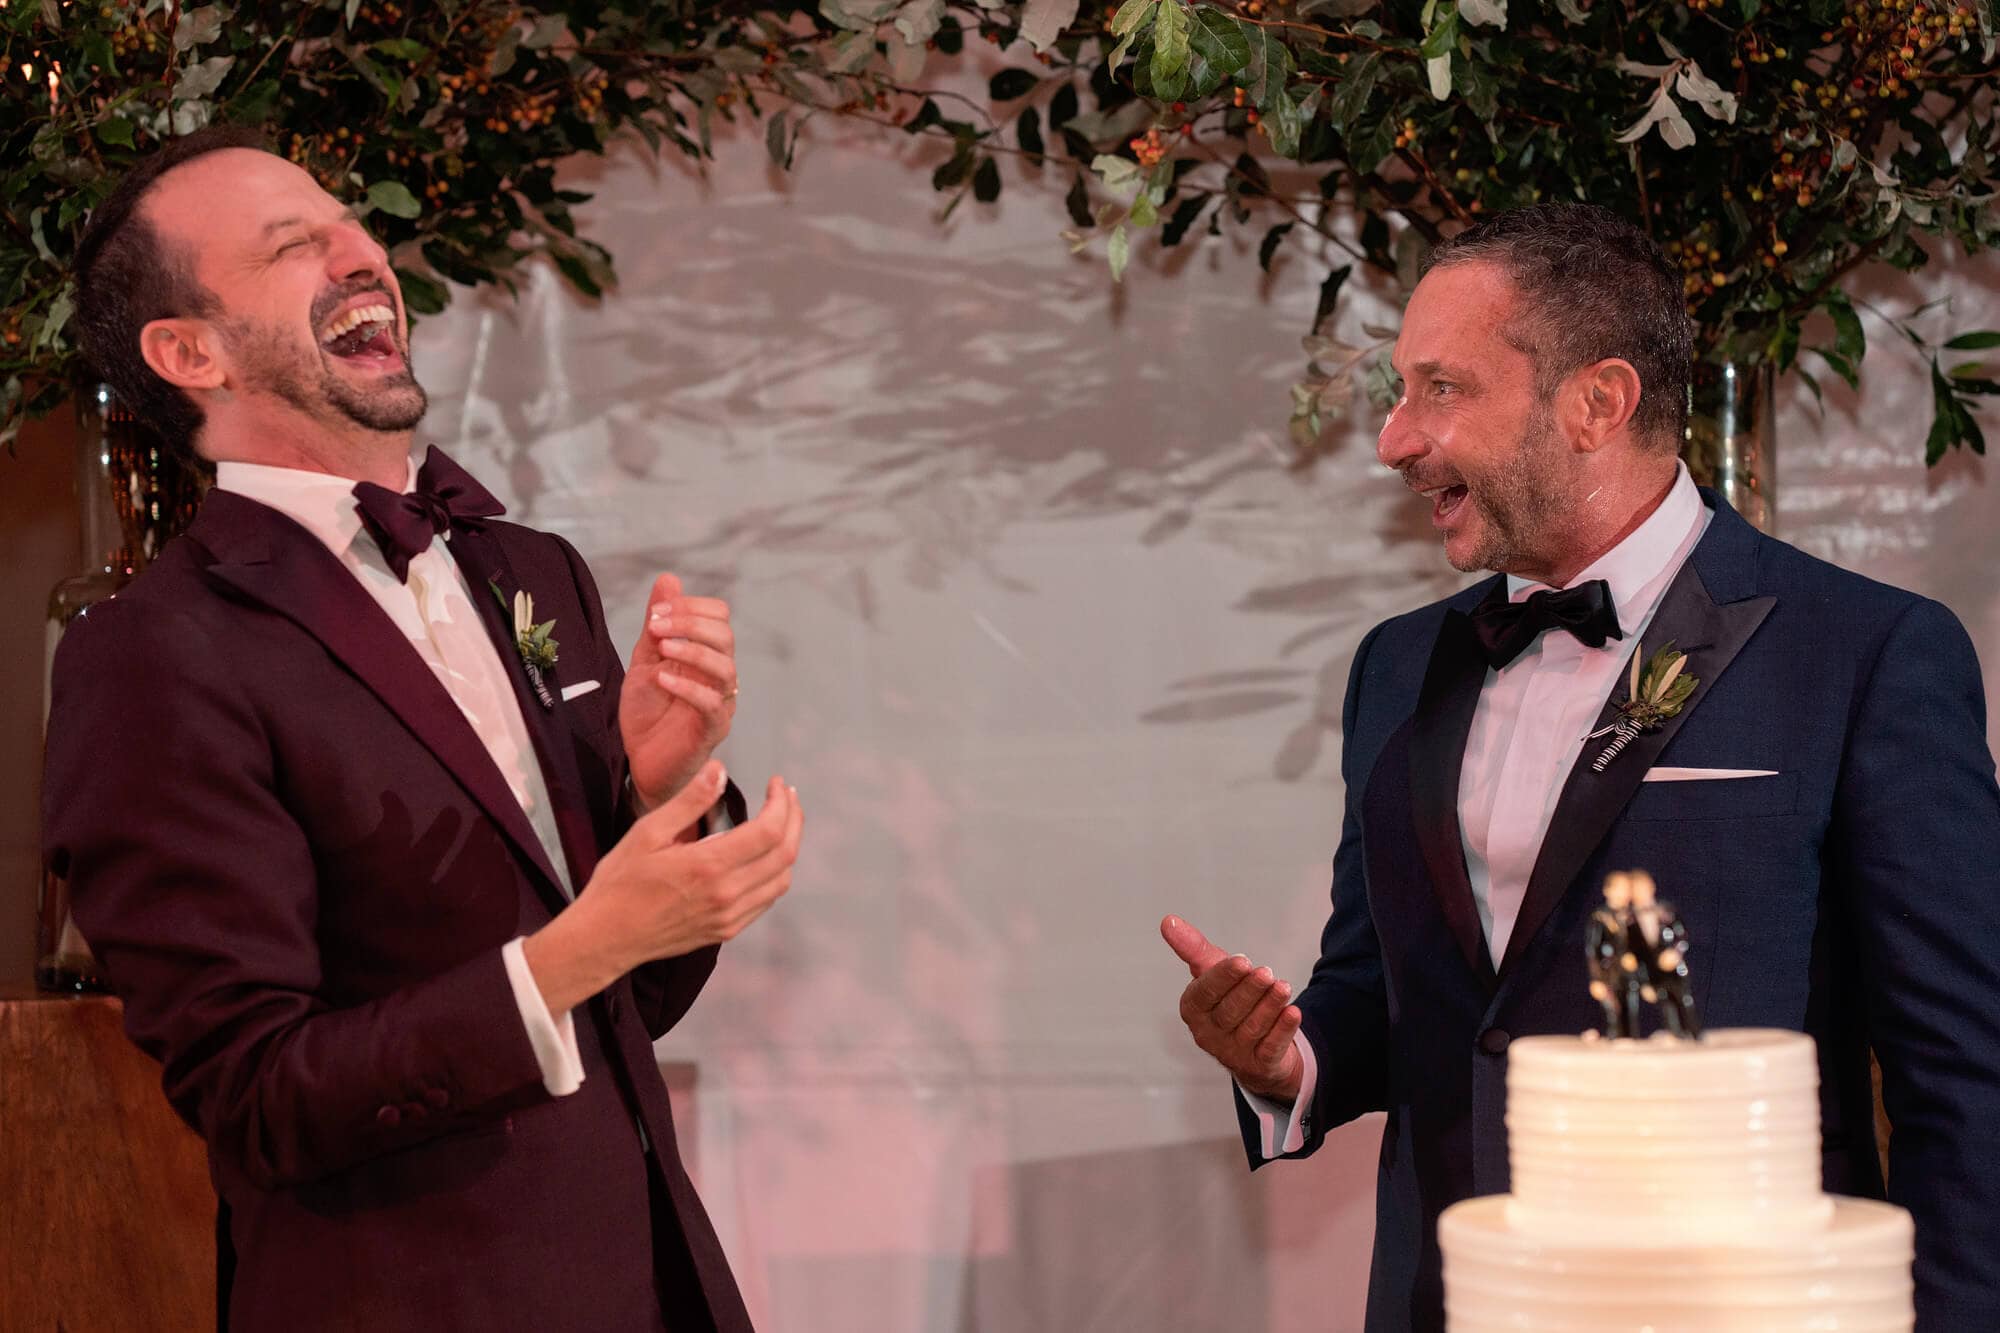 funny cake cutting moment for two grooms at provincetown pilgrim monument wedding